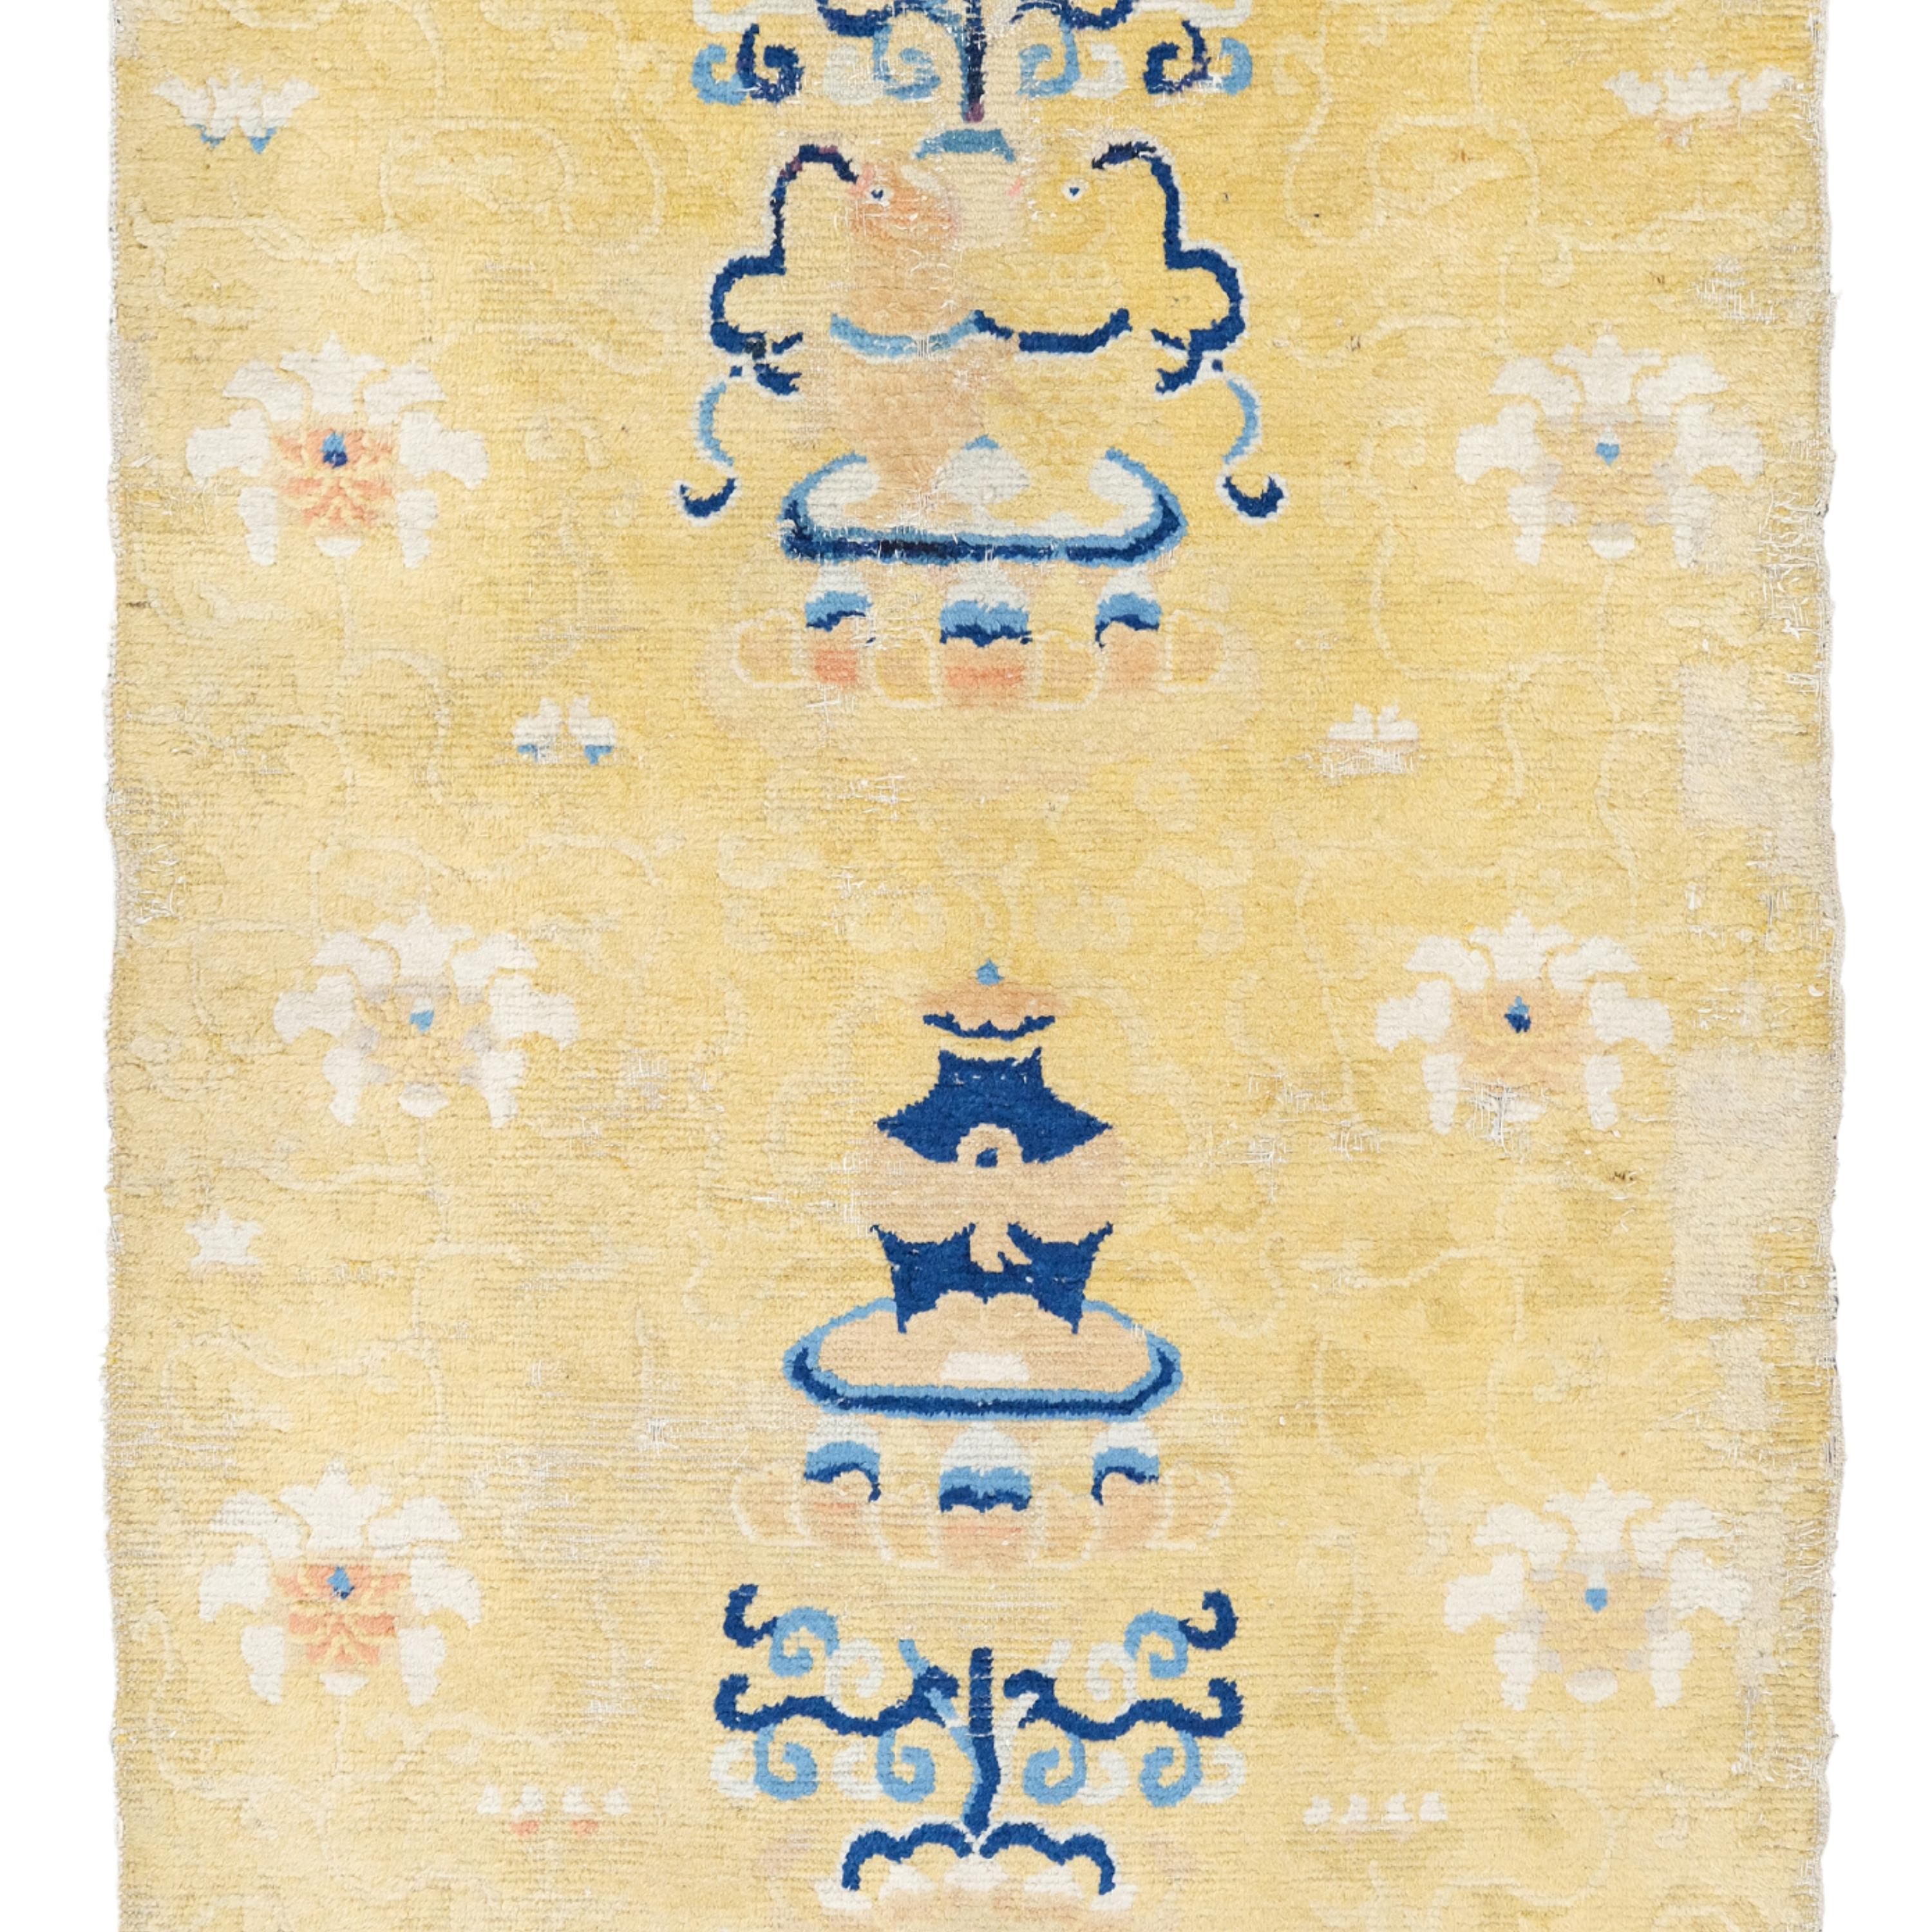 Antique Ningxia Pillar Rug - Late 18th Century Chinese Ningxia Pillar Rug In Good Condition For Sale In Sultanahmet, 34